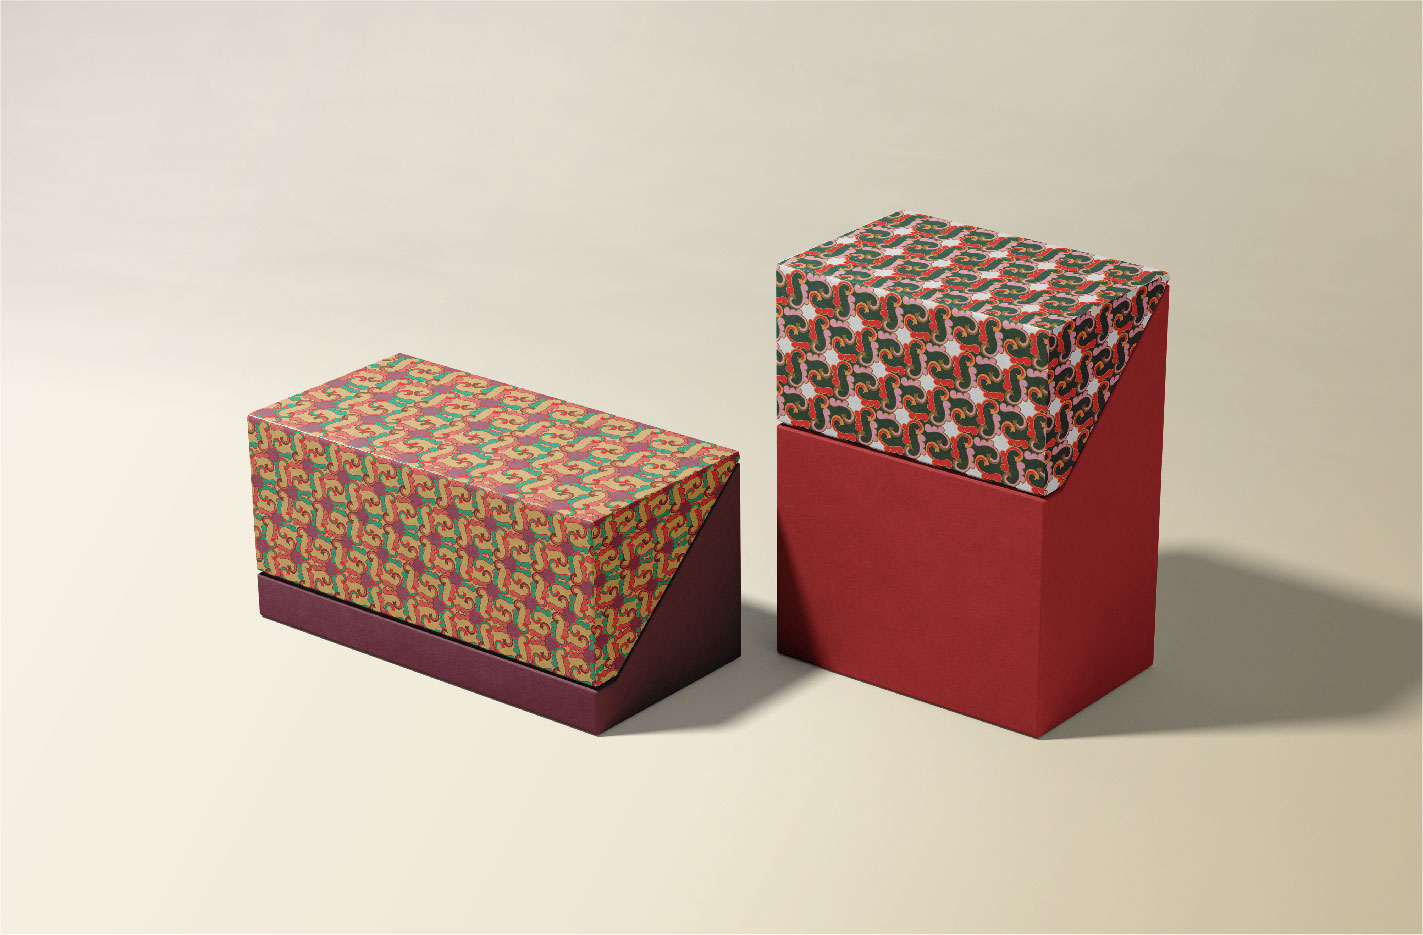 Red box with a pattern on it and a red box with a pattern on.